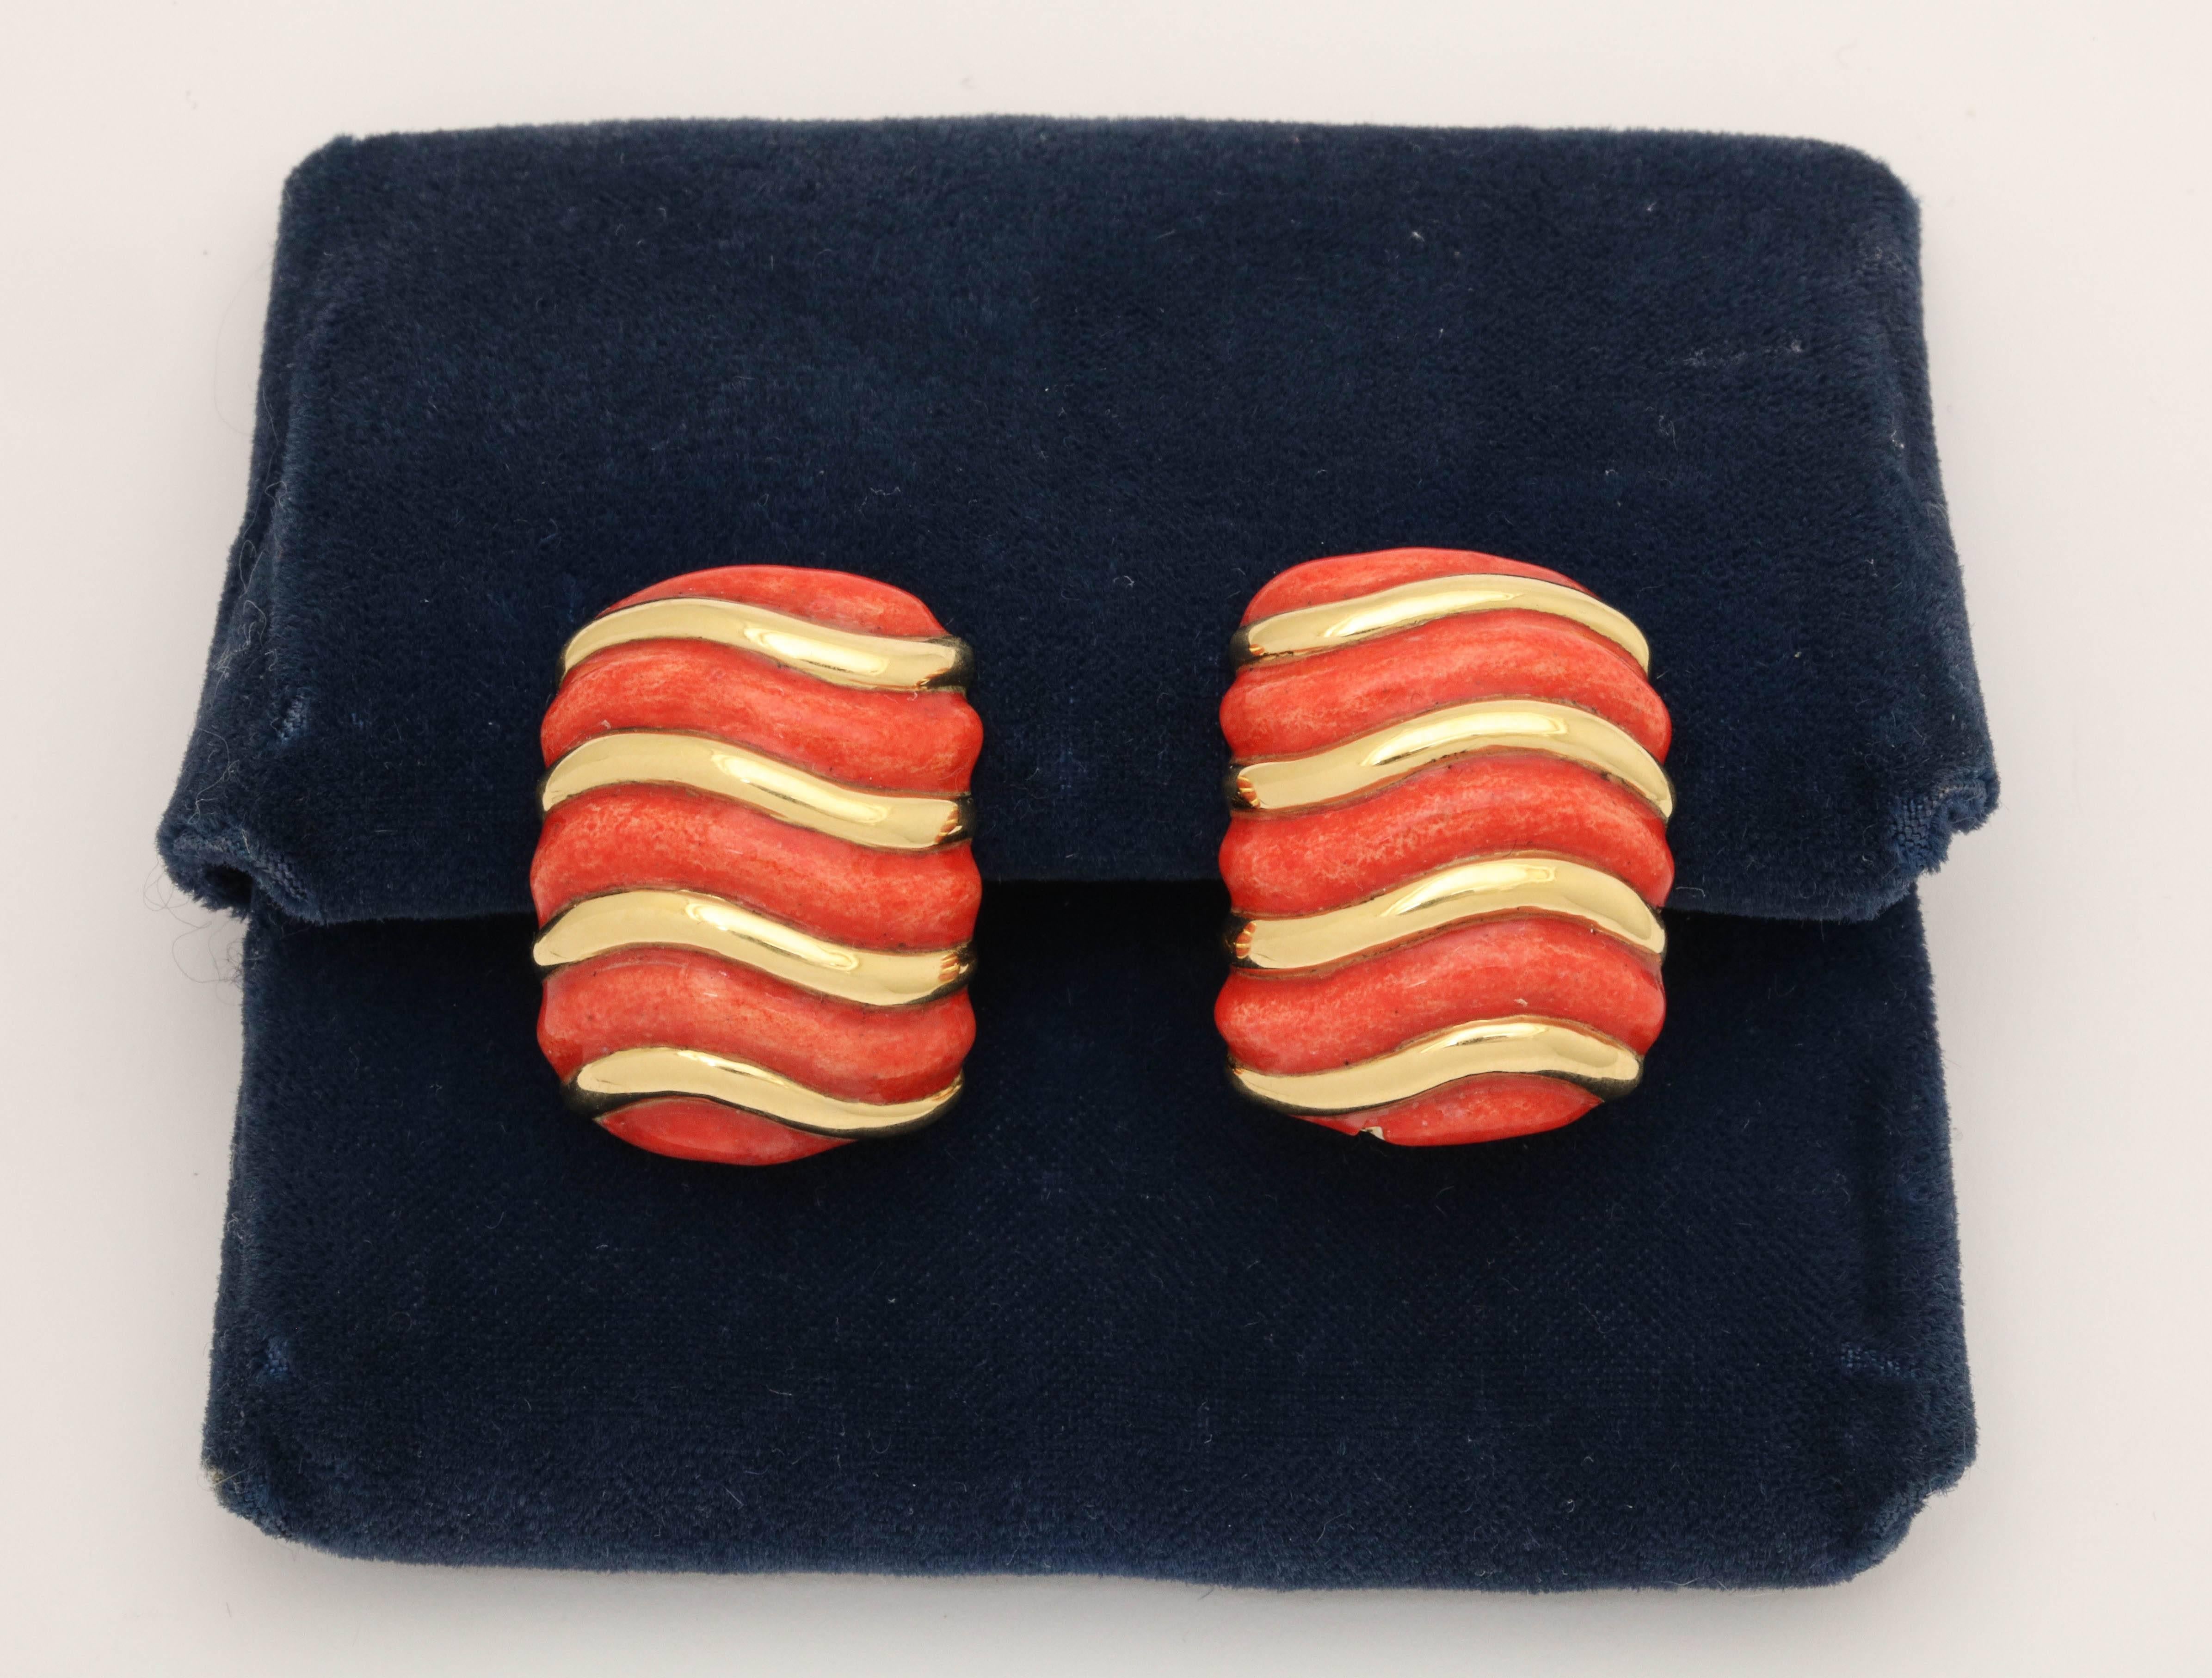 One Pair Of Ladies 18kt Yellow Gold Chic Coral Orange Color Enamel "Waves" Design Earclips Created With Alternating Wave Patterns Of 18kt Yellow Gold And Orange Enamel Asymmetrical Stripes.Made With Large Clip On Omega Backs And Posts For